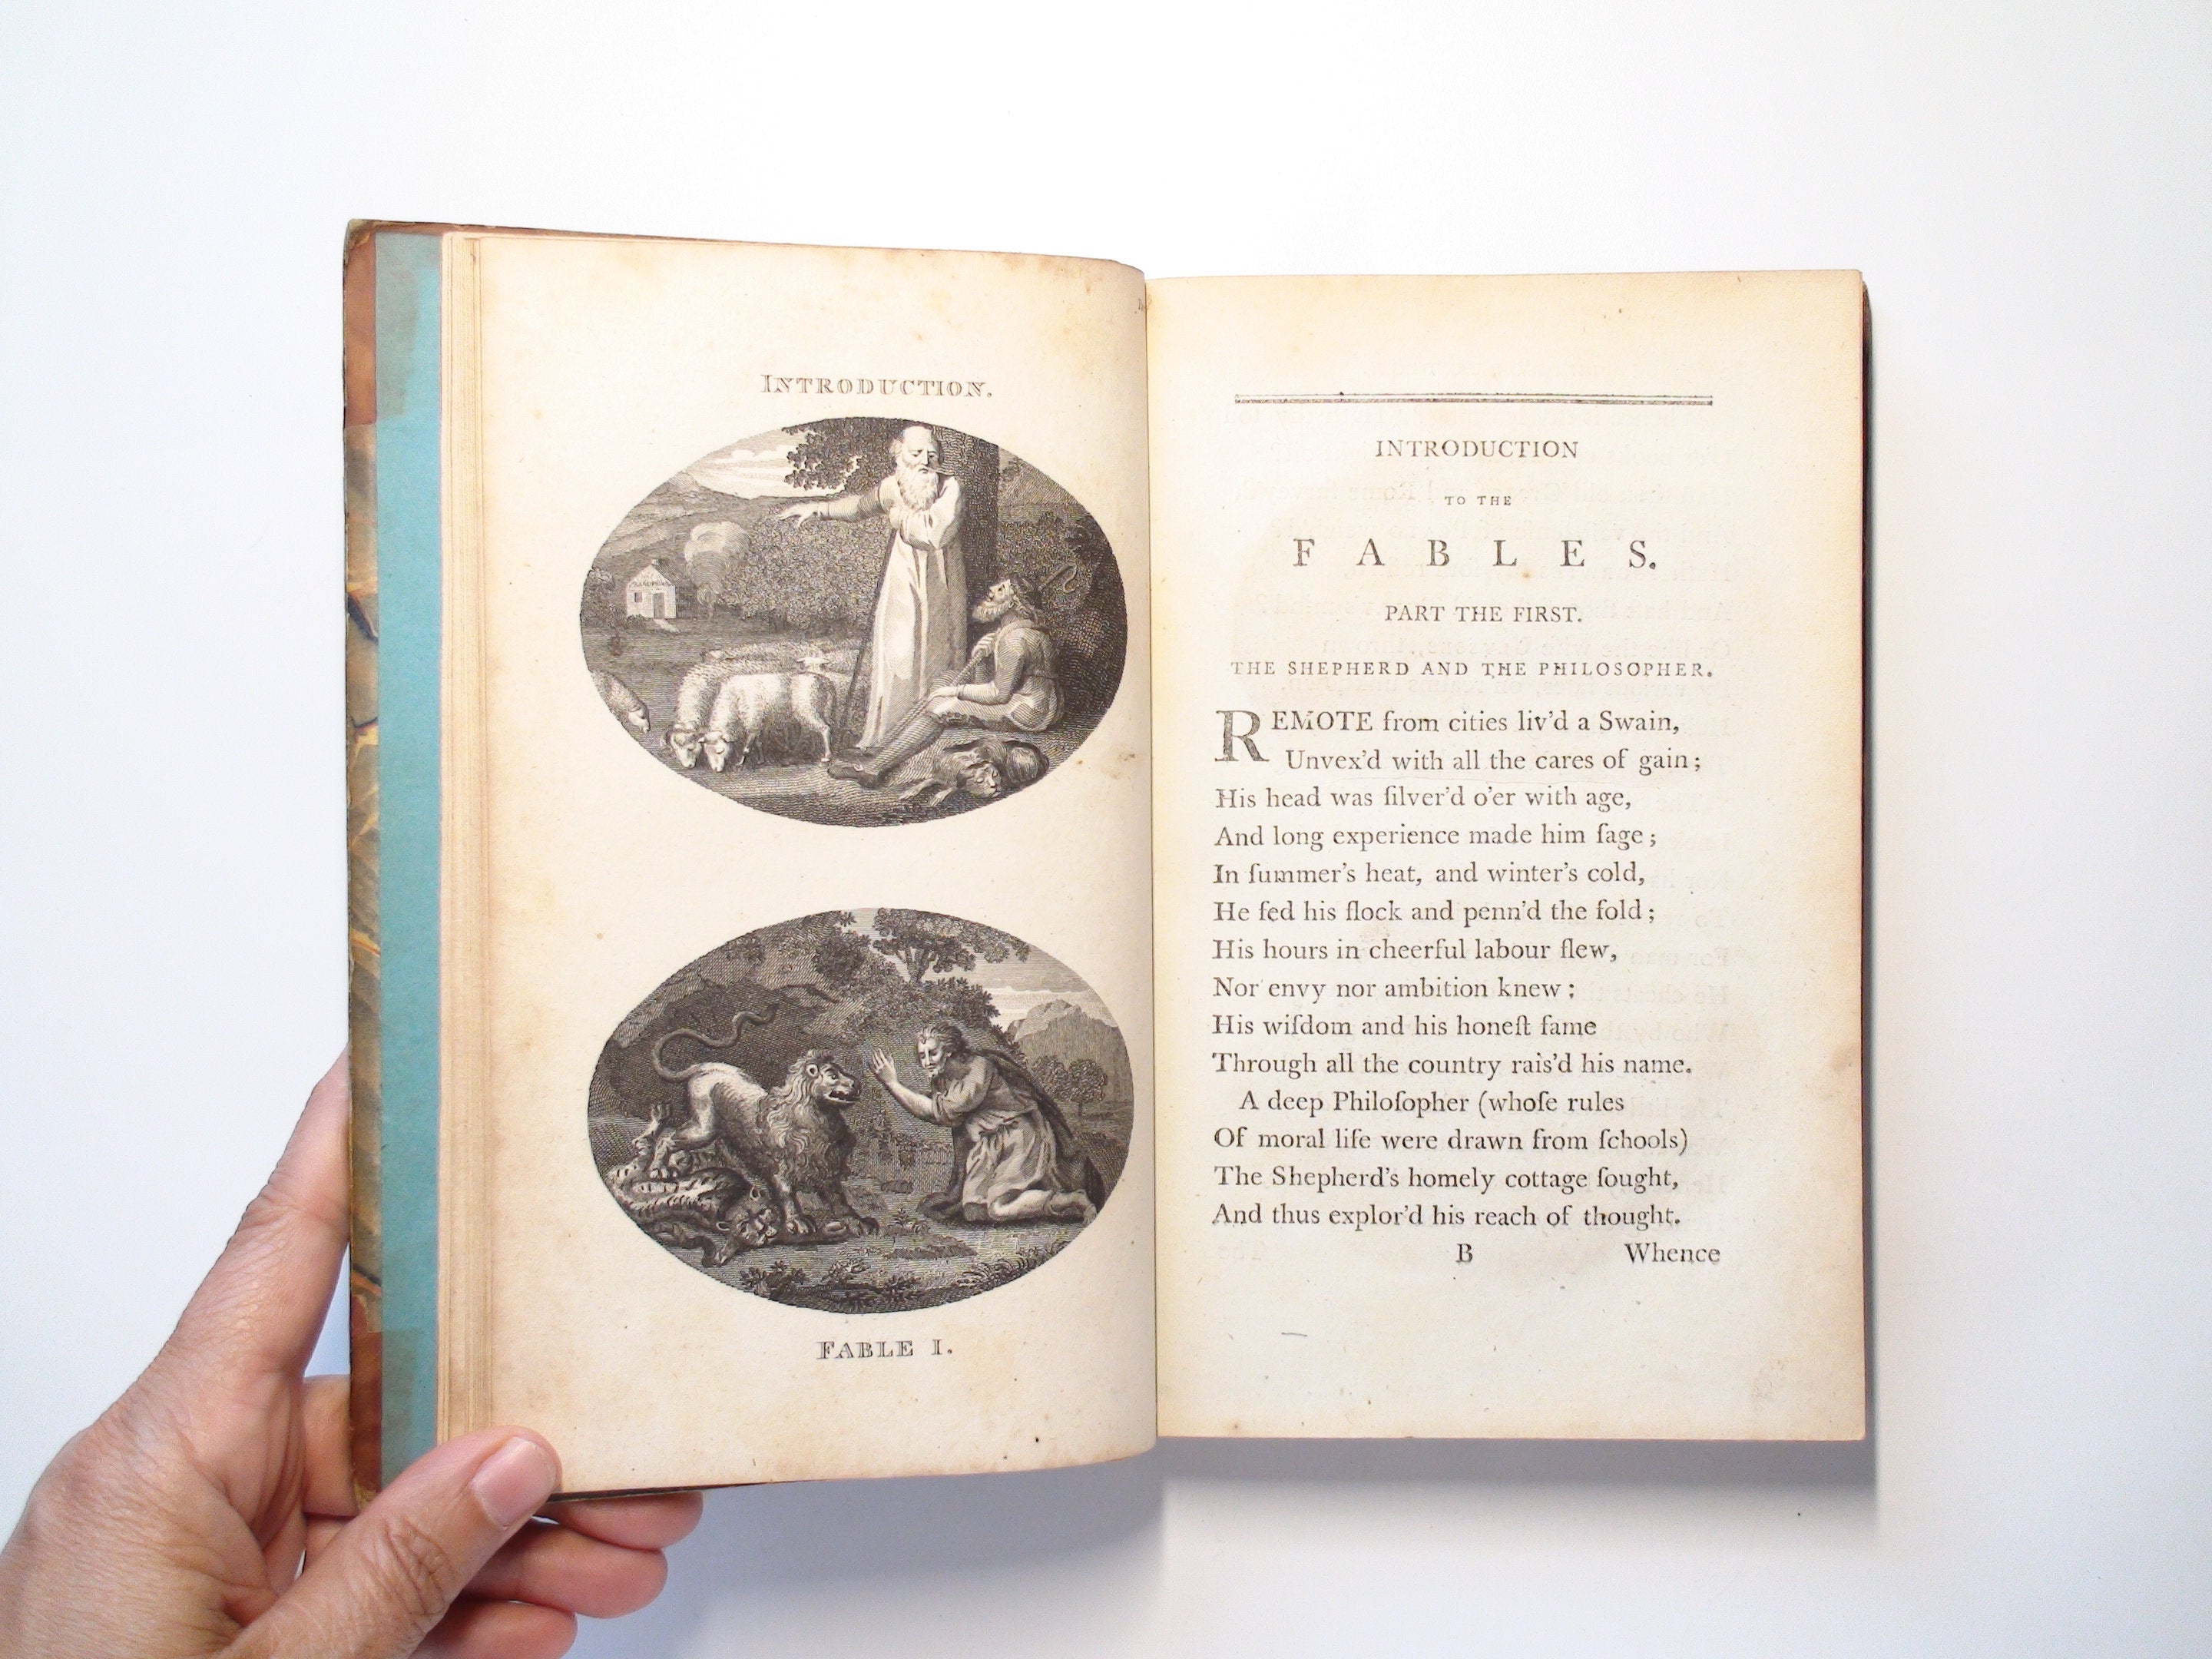 Fables by John Gay, Richly Illustrated with Engravings, Rare, Leather, 1793